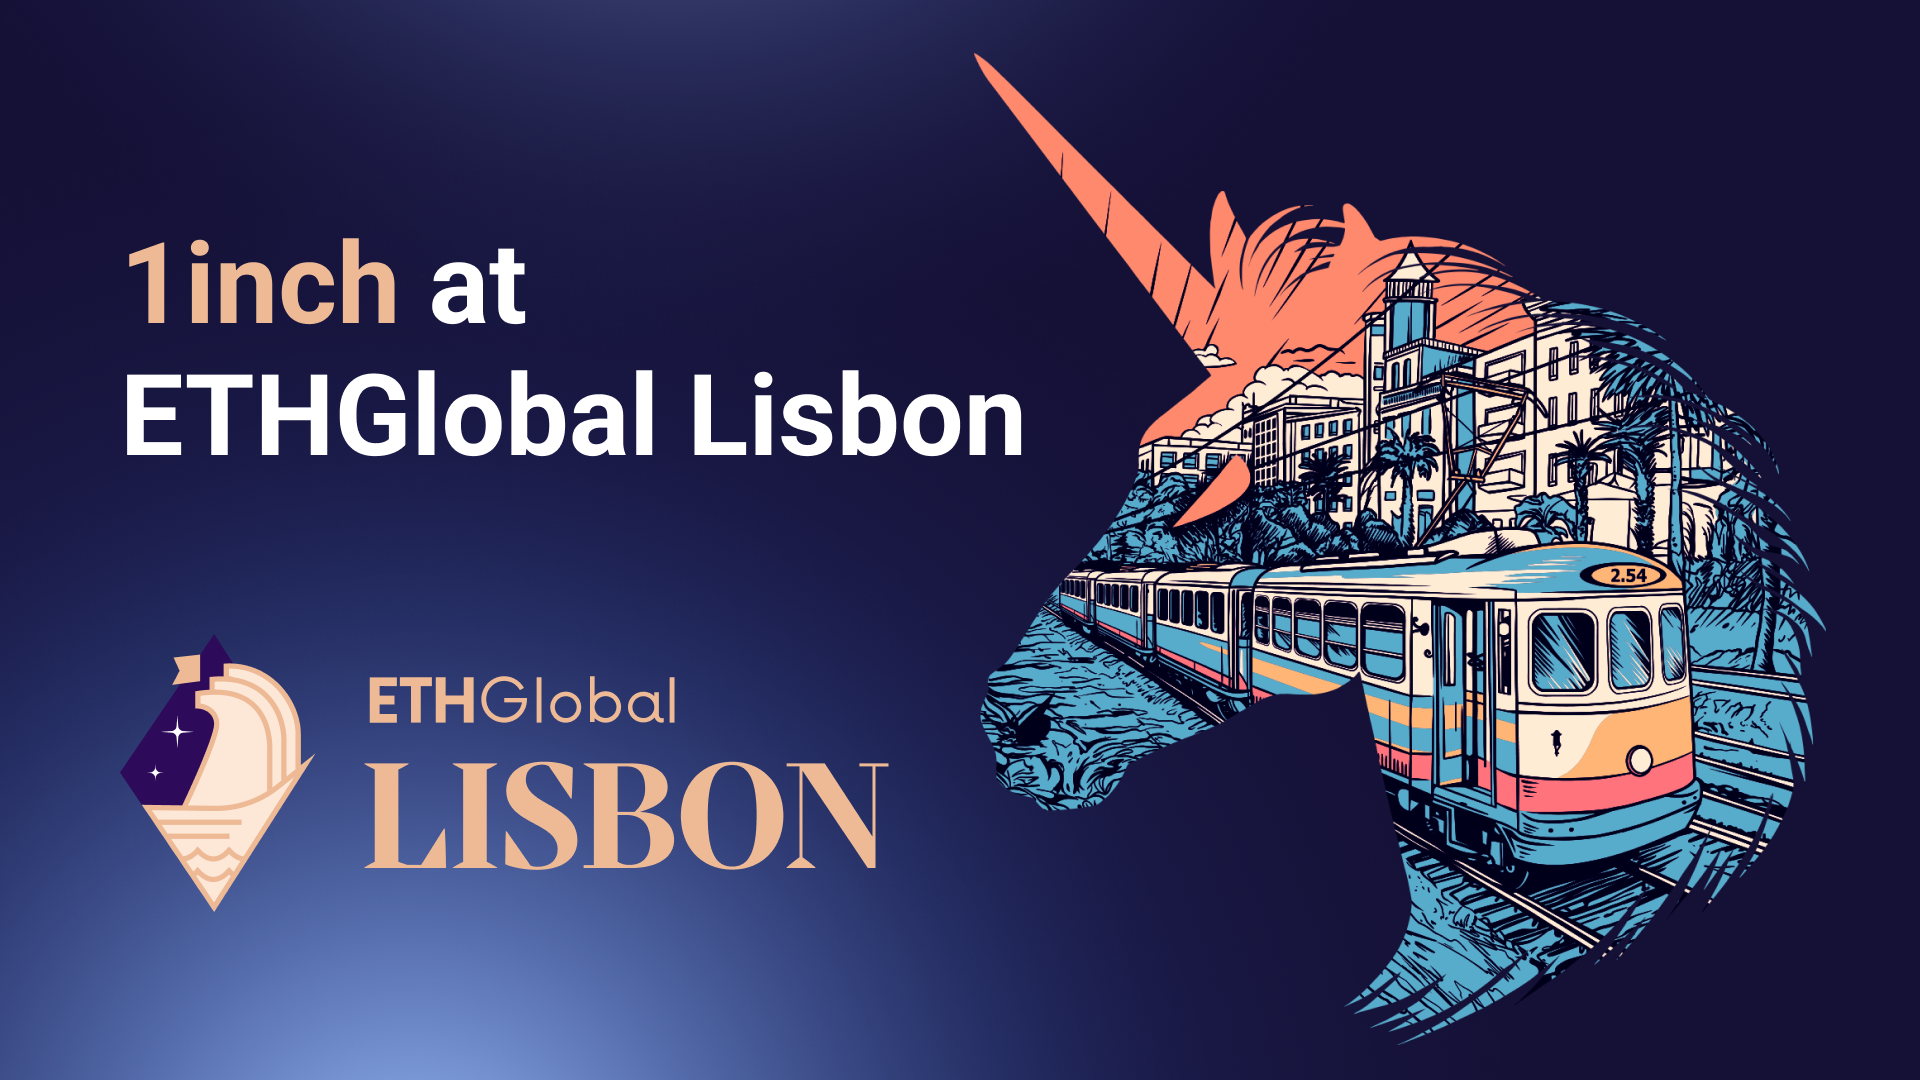 1inch to attend Lisbon events